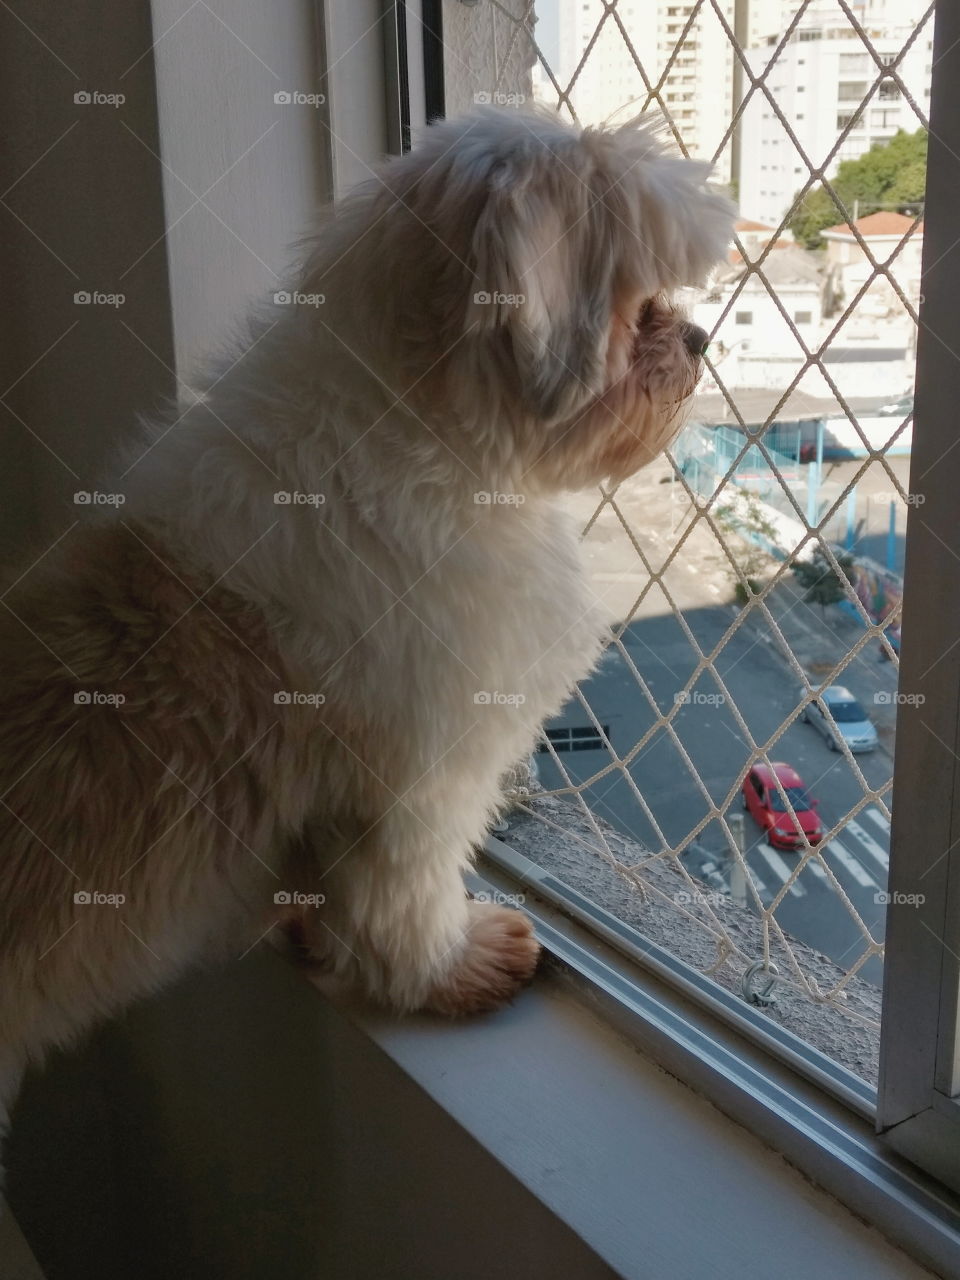 A dog and his window